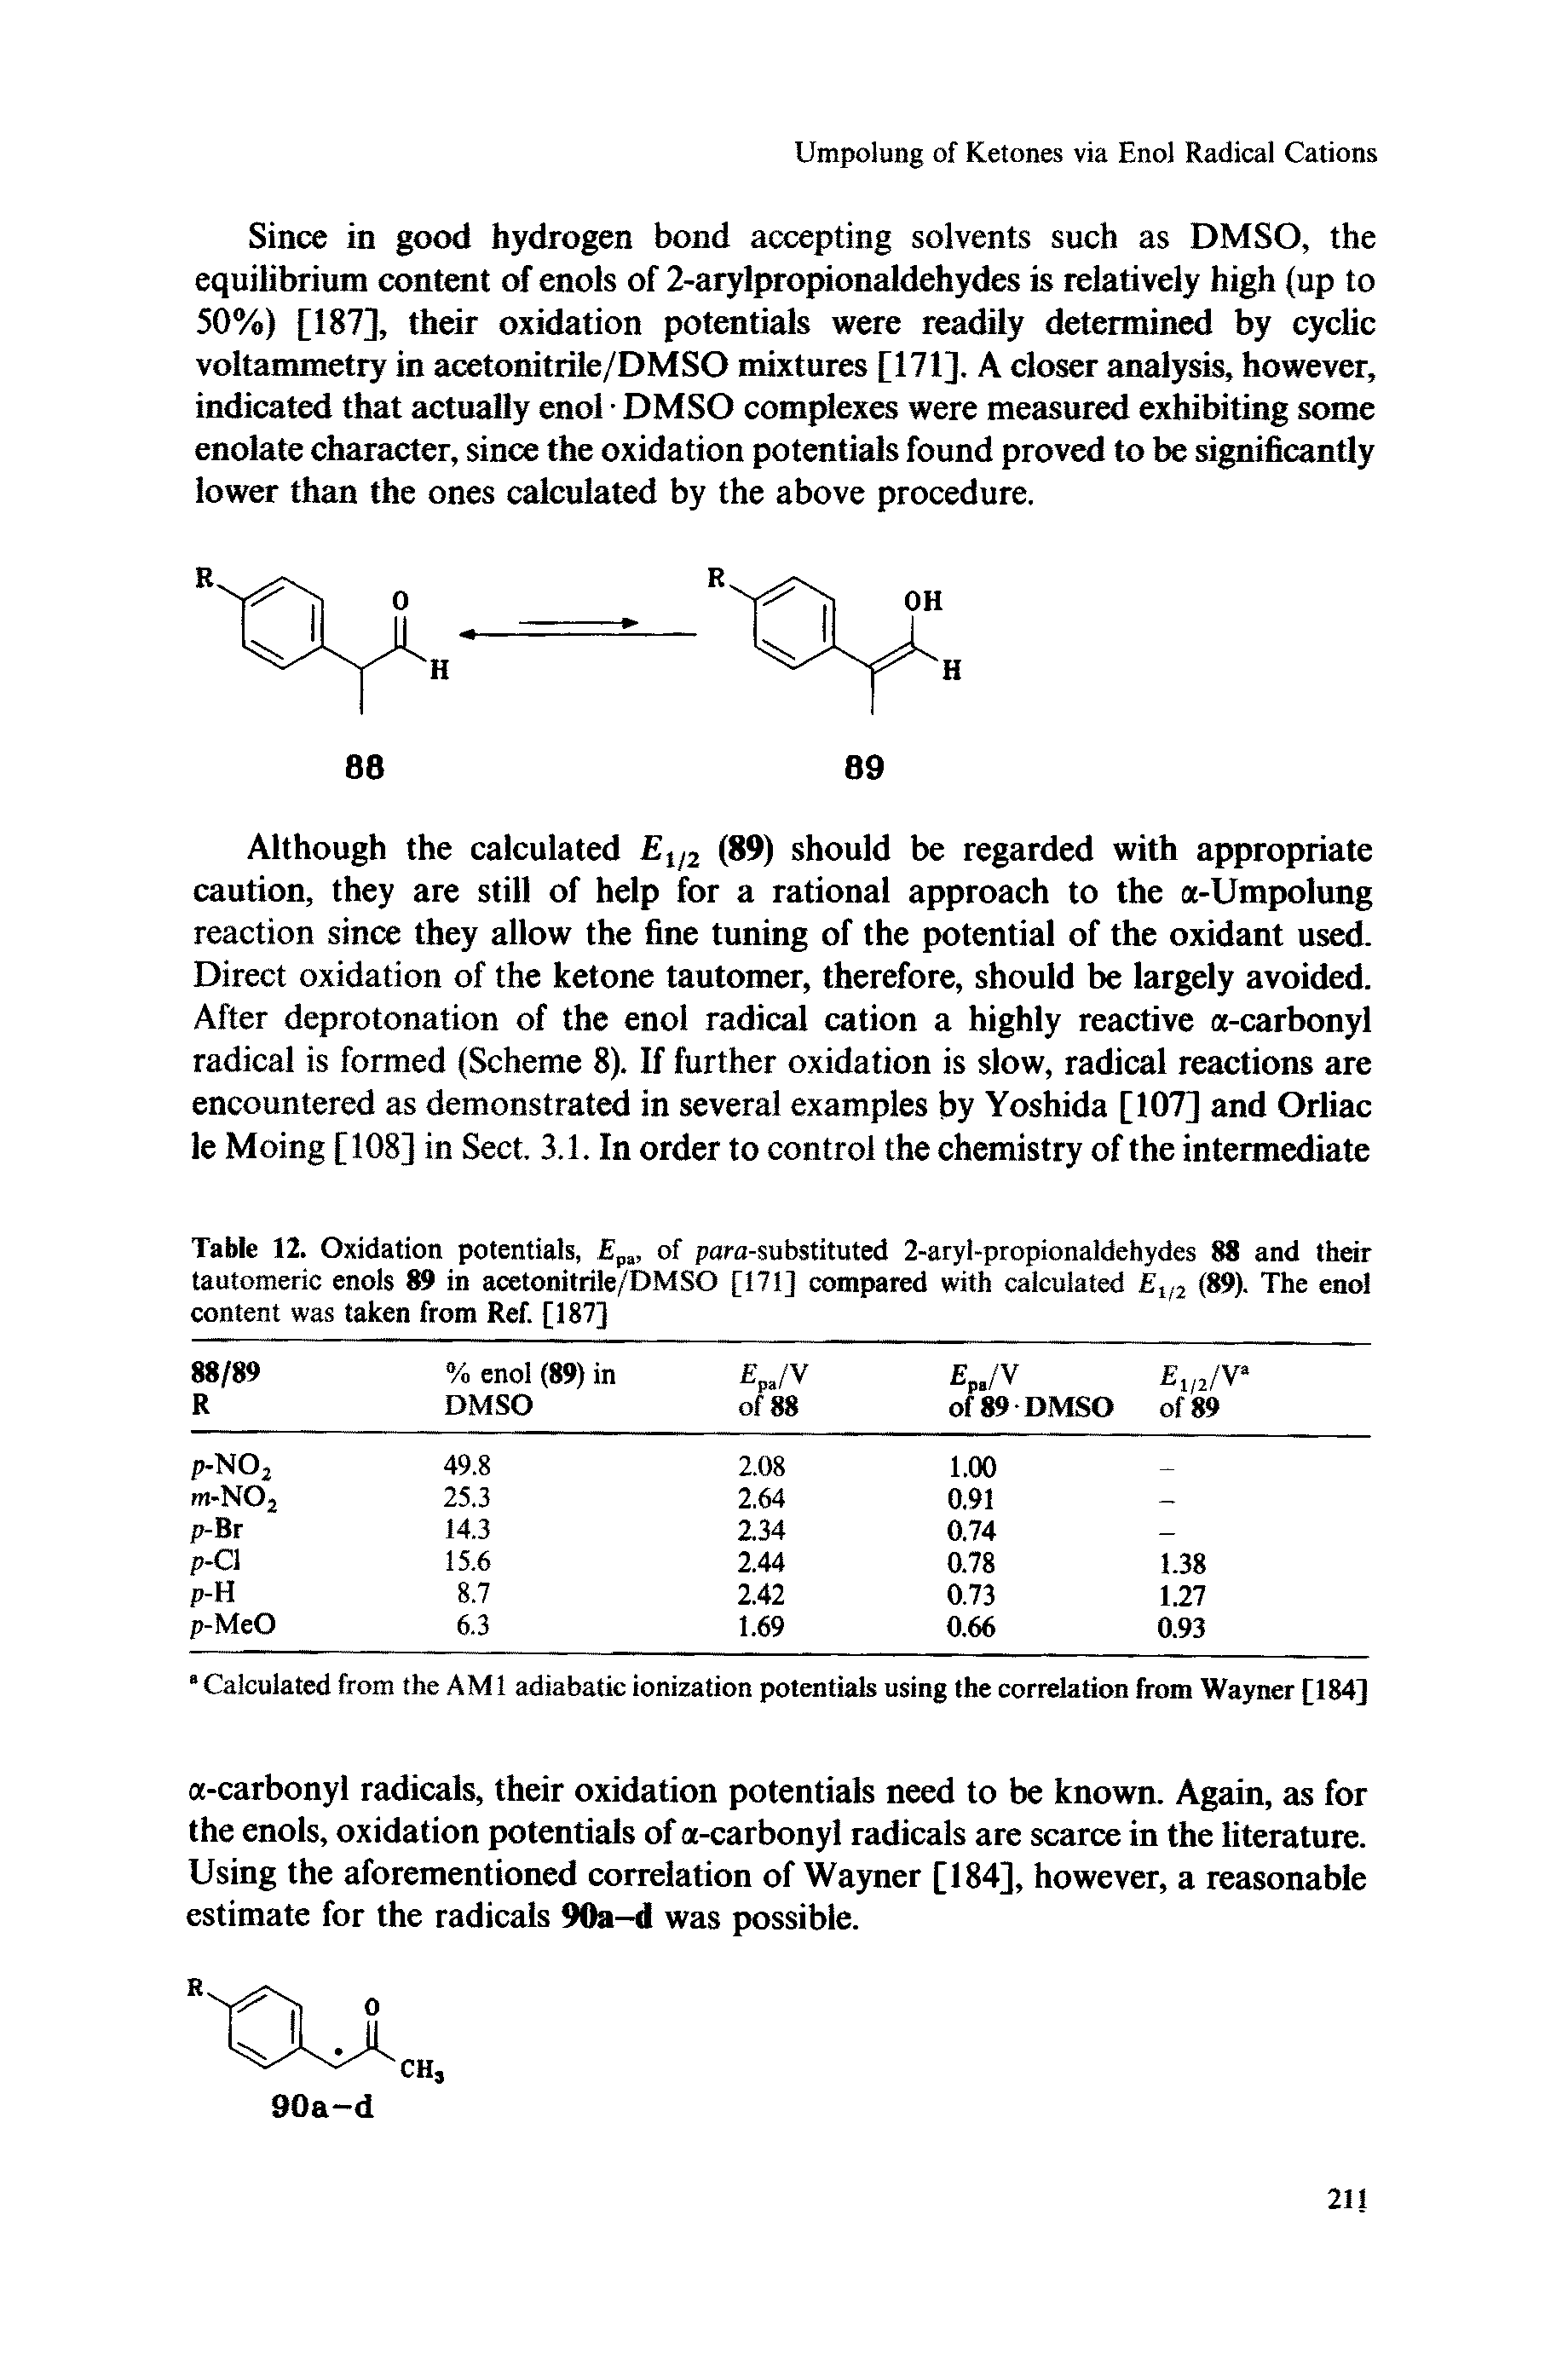 Table 12. Oxidation potentials, Ep, of pora-substituted 2-aryl-propionaldehydes 88 and their tautomeric enols 89 in acetonitrile/DMSO [171] compared with calculated , 2 (89)- The enol content was taken from Ref. [187]...